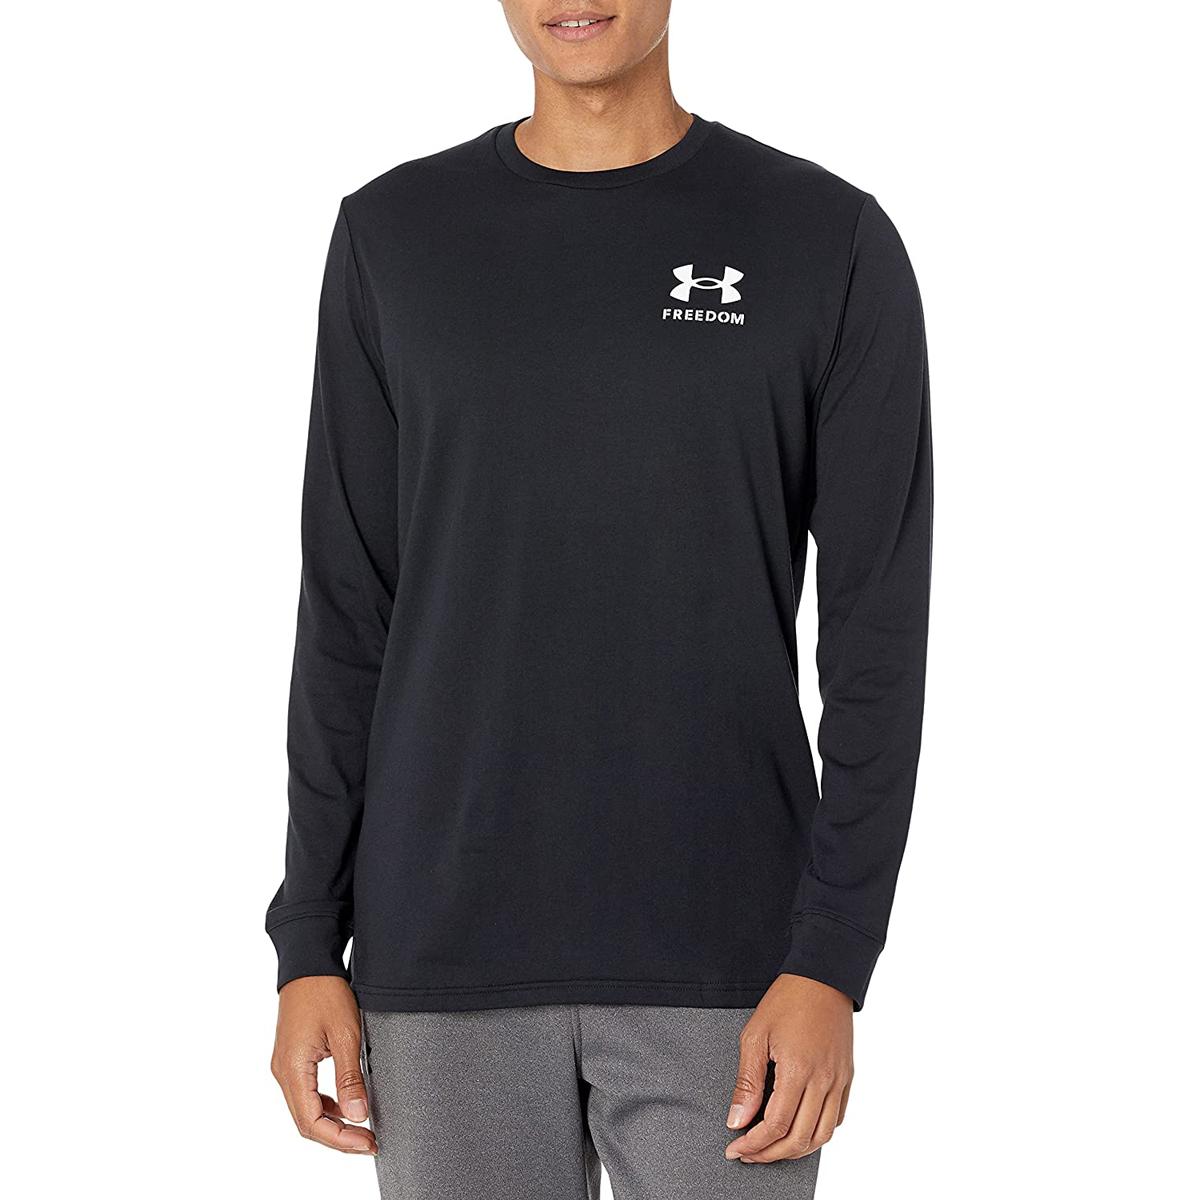 Under Armour Mens Freedom Flag Long Sleeve T-Shirt for $15.73